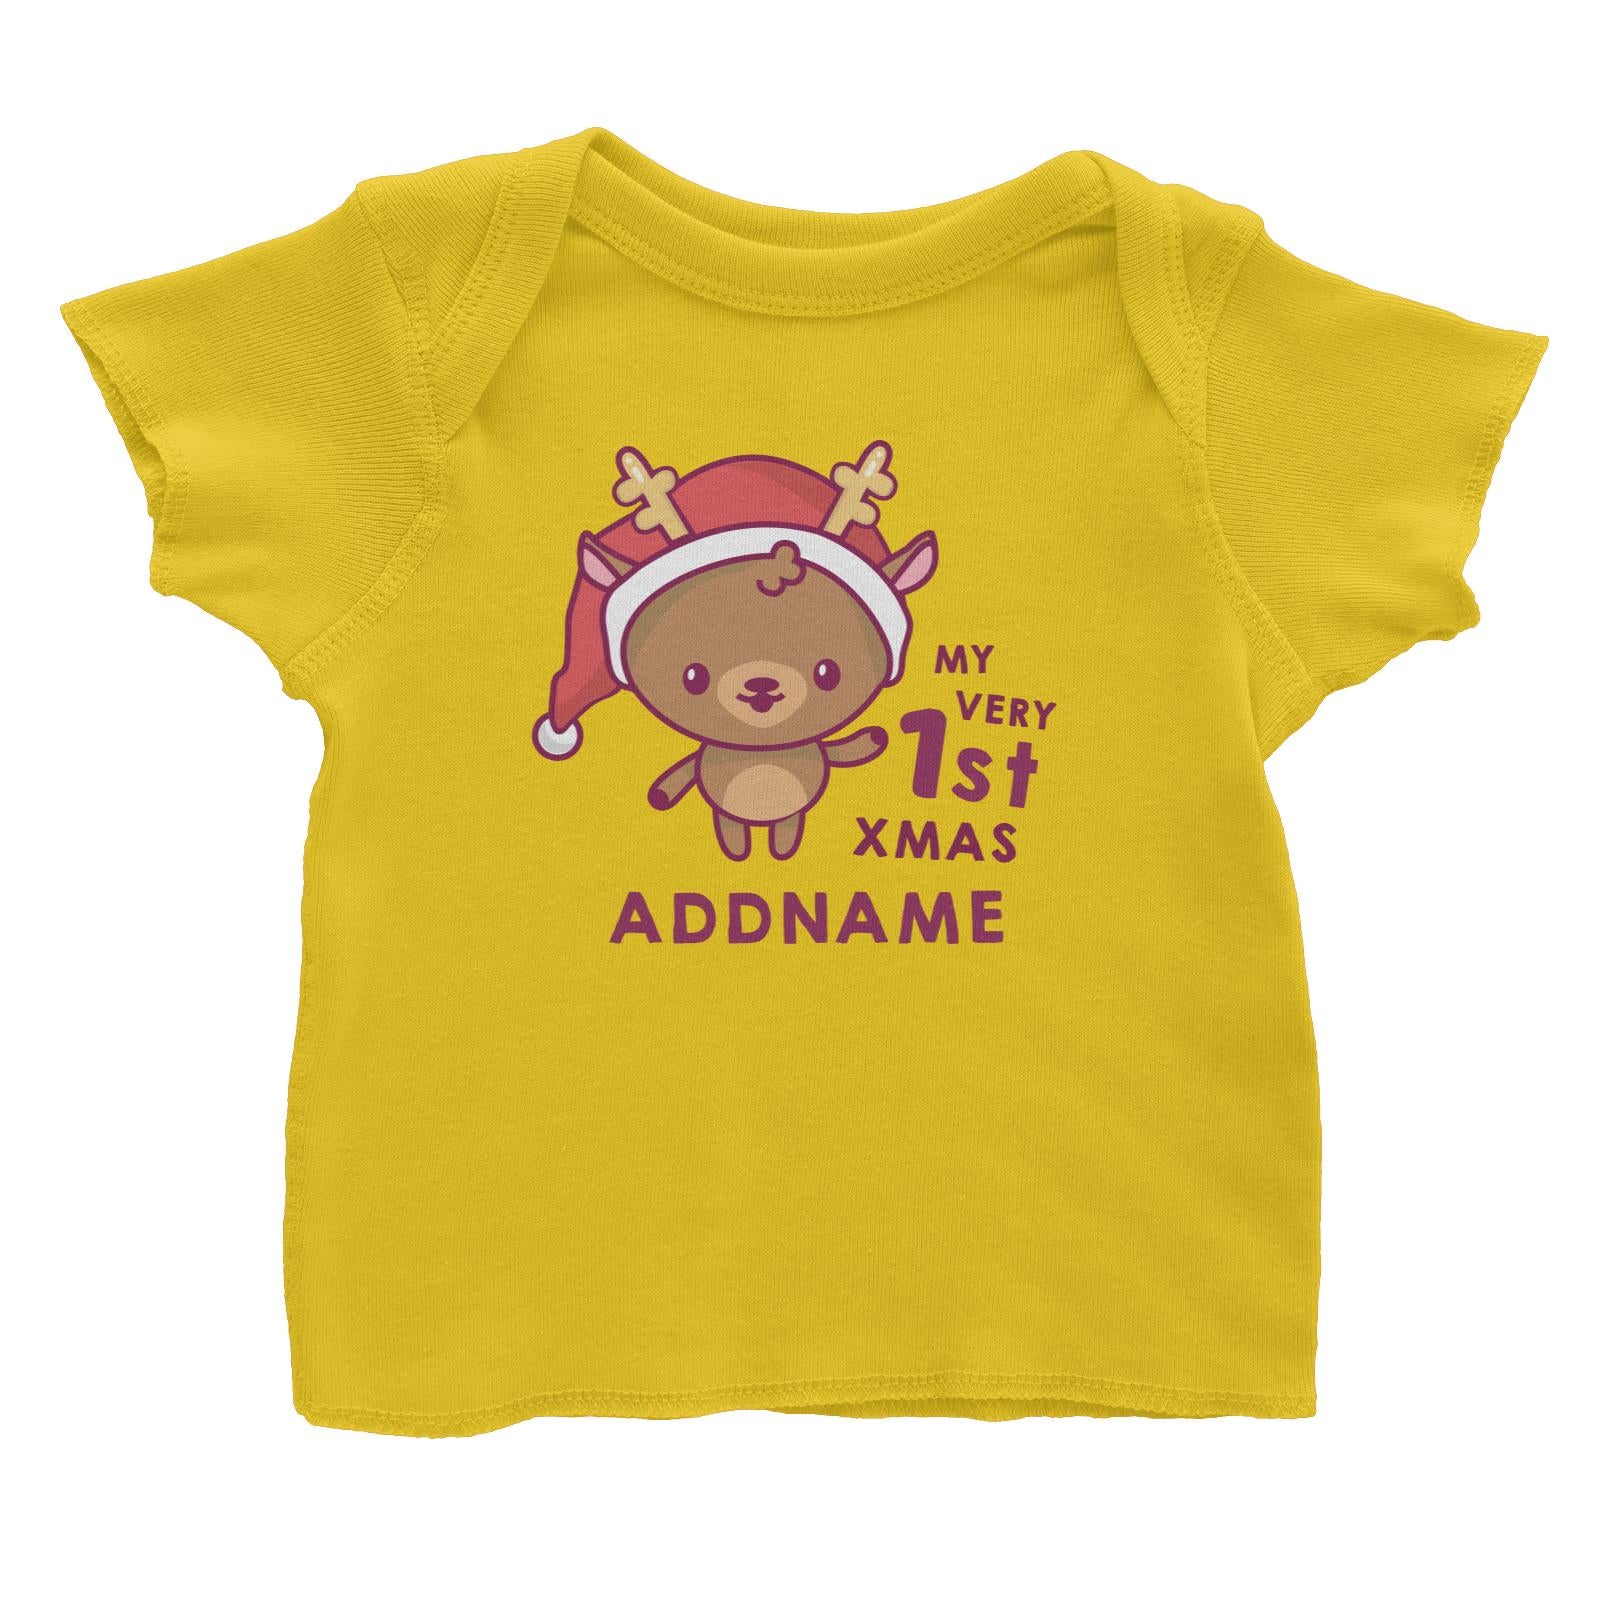 Christmas My Very 1st Deer Addname Baby T-Shirt